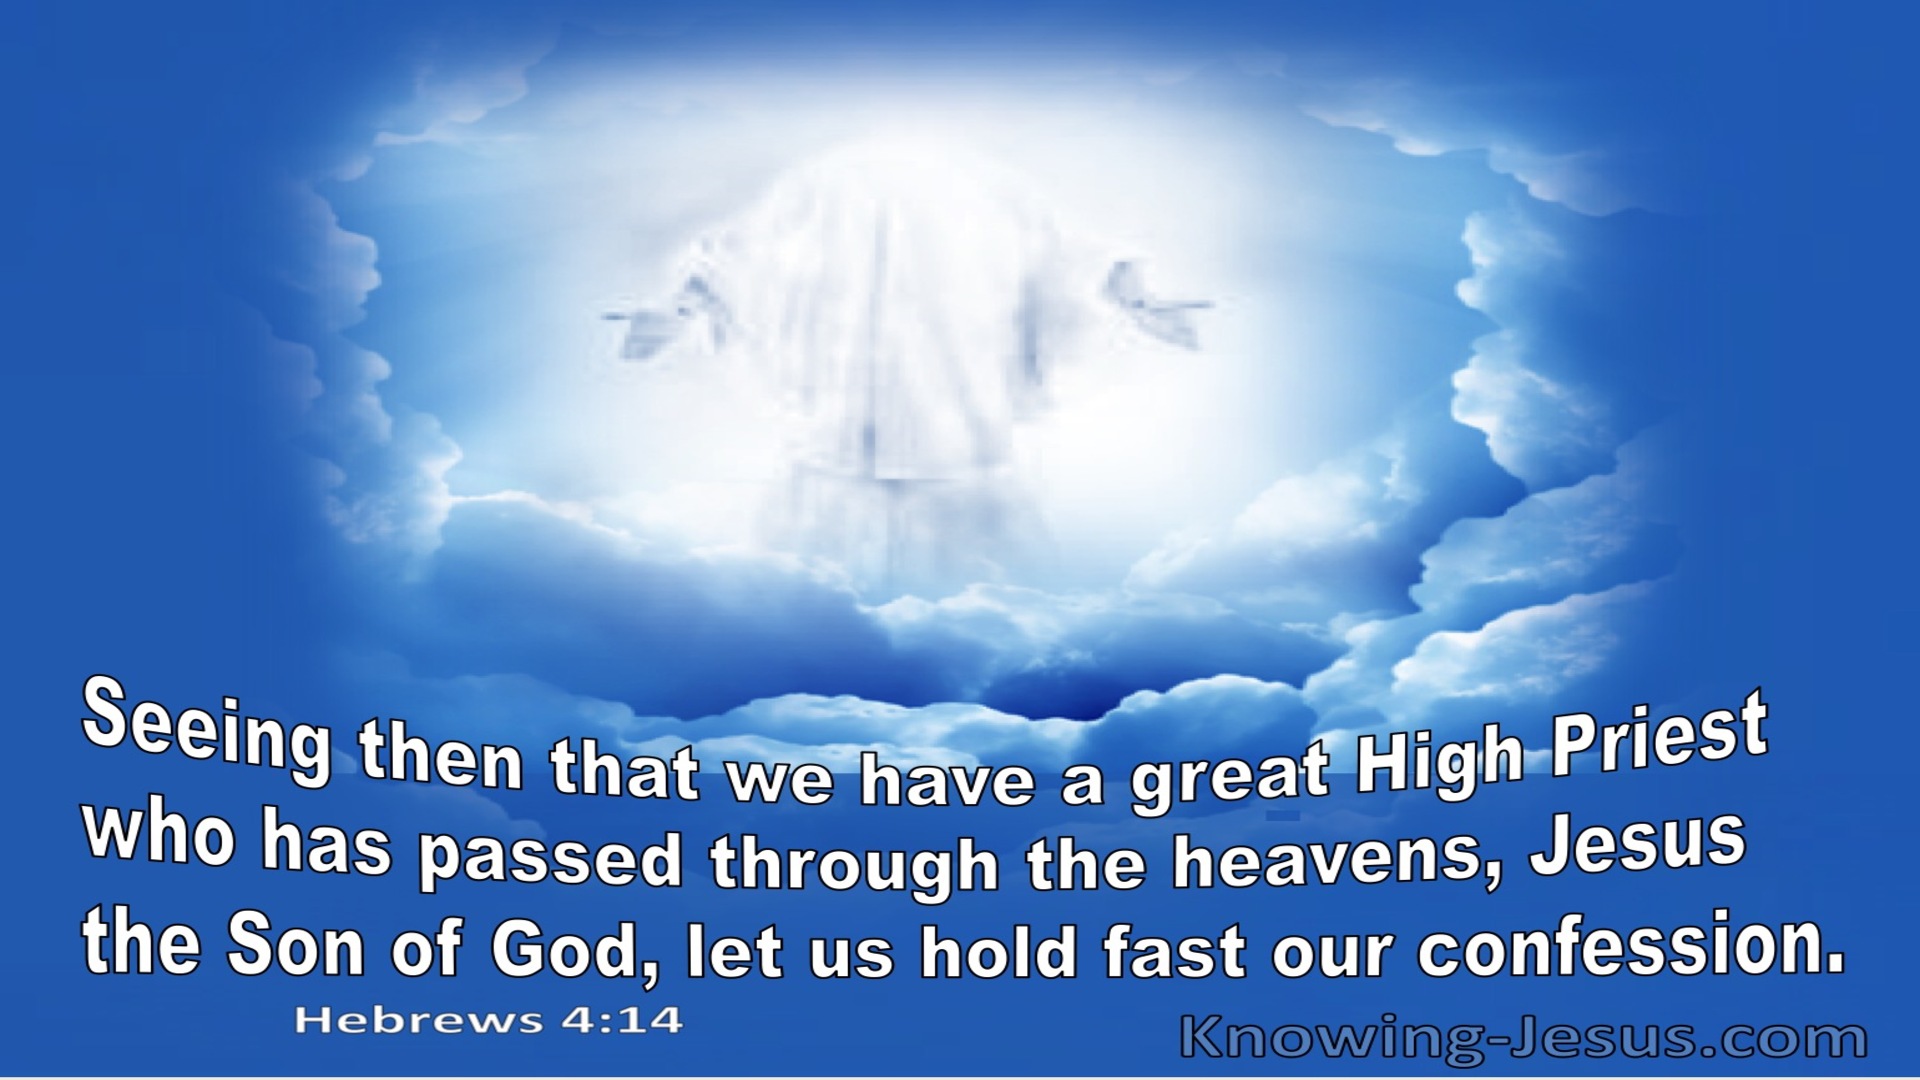 Hebrews 4:14 Seeing His Is Great Hight Priest Let Us Hold Fast Our Confession (blue)